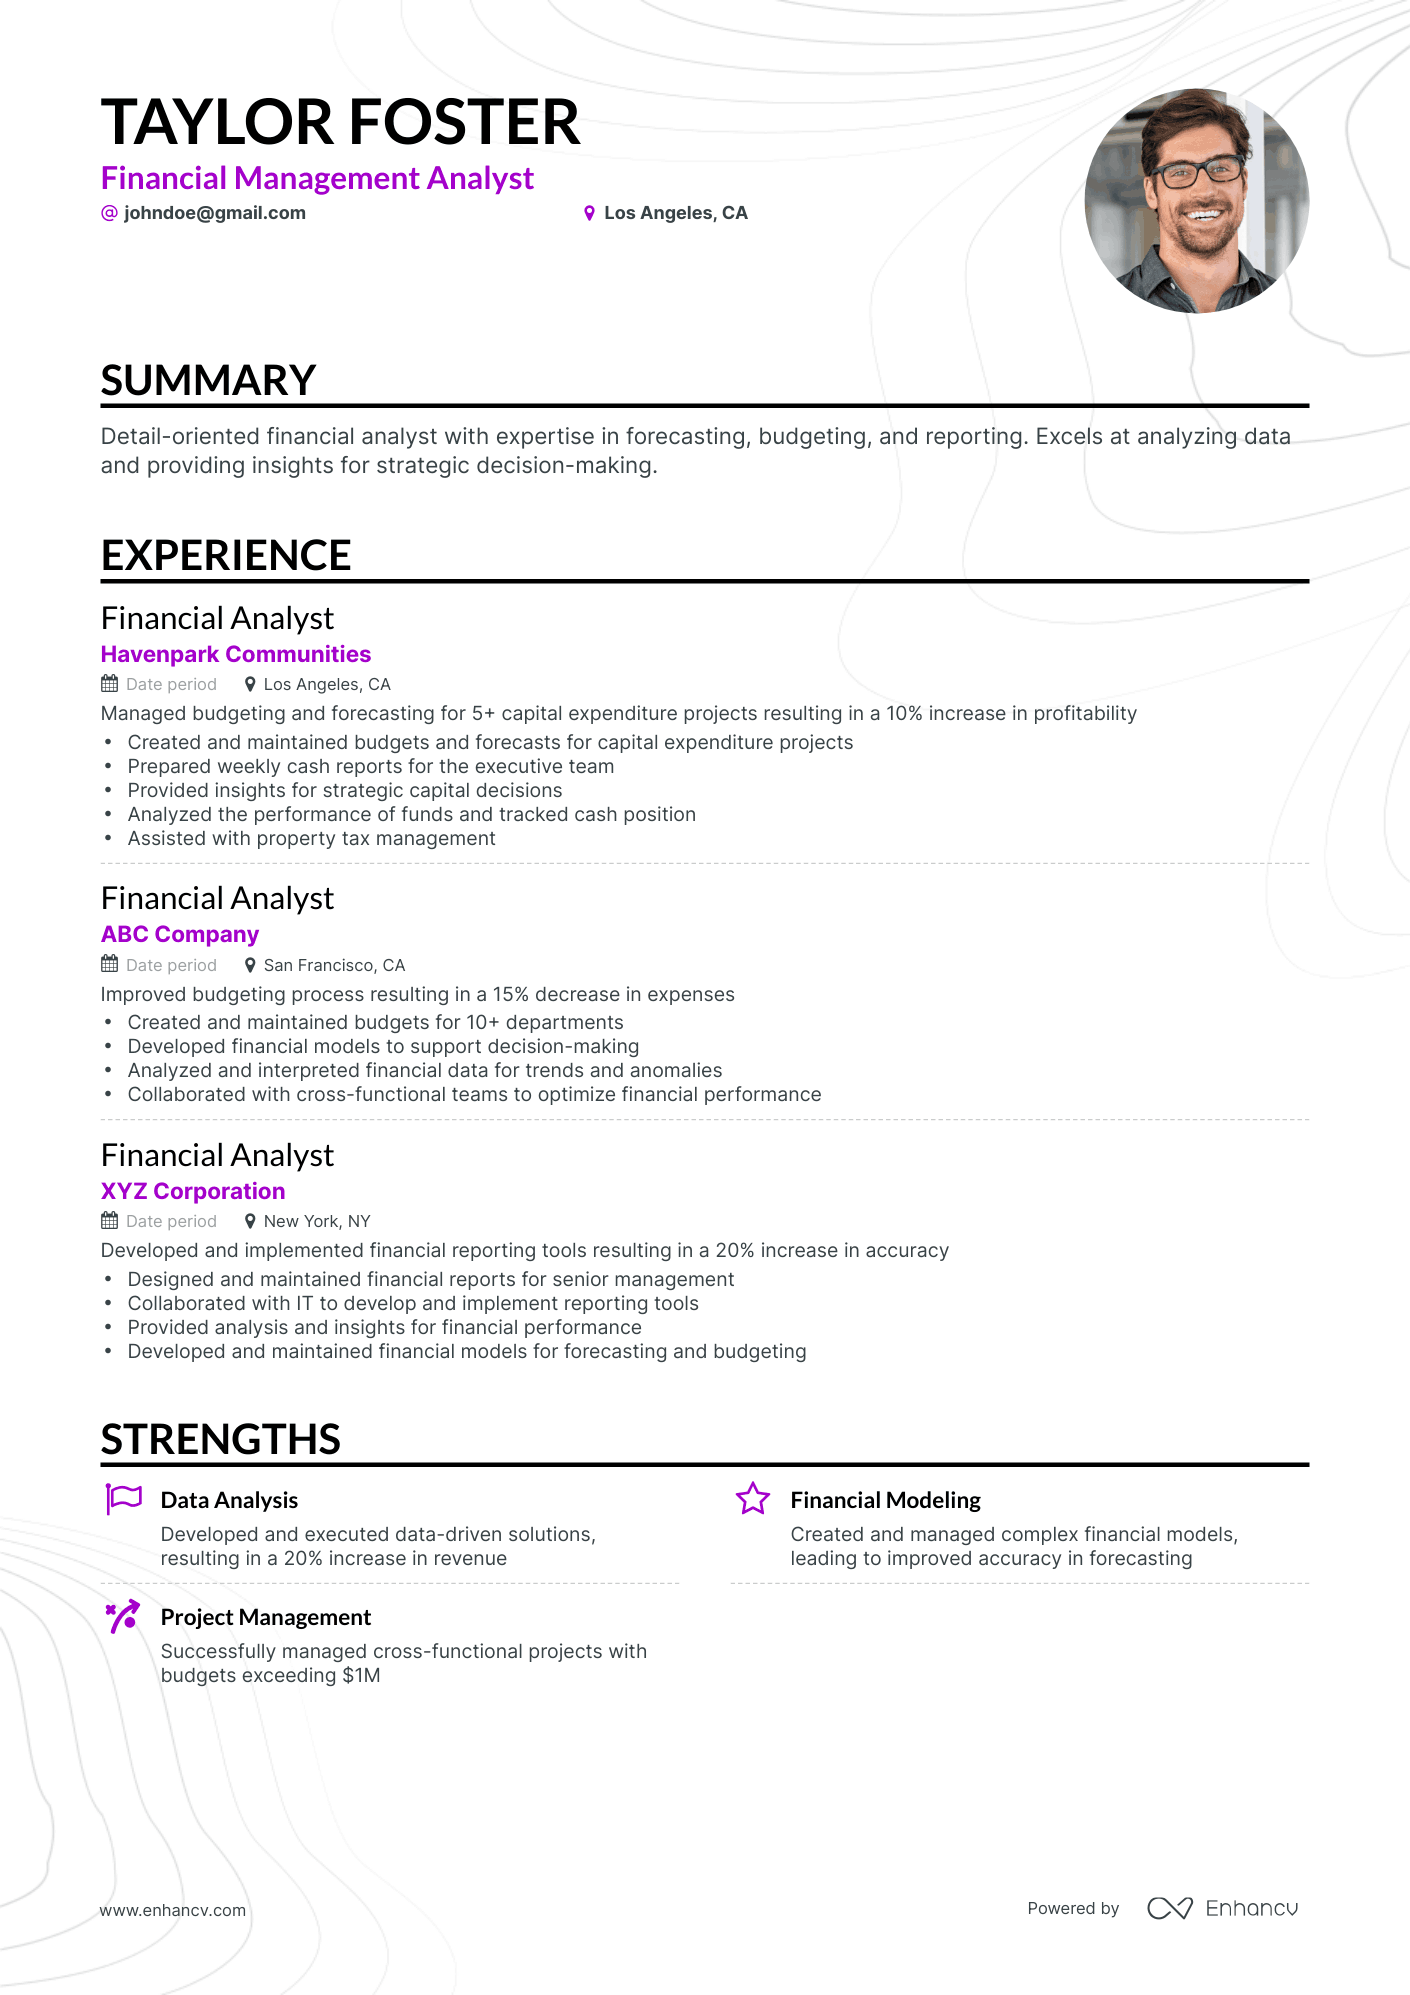 Classic Financial Management Analyst Resume Template